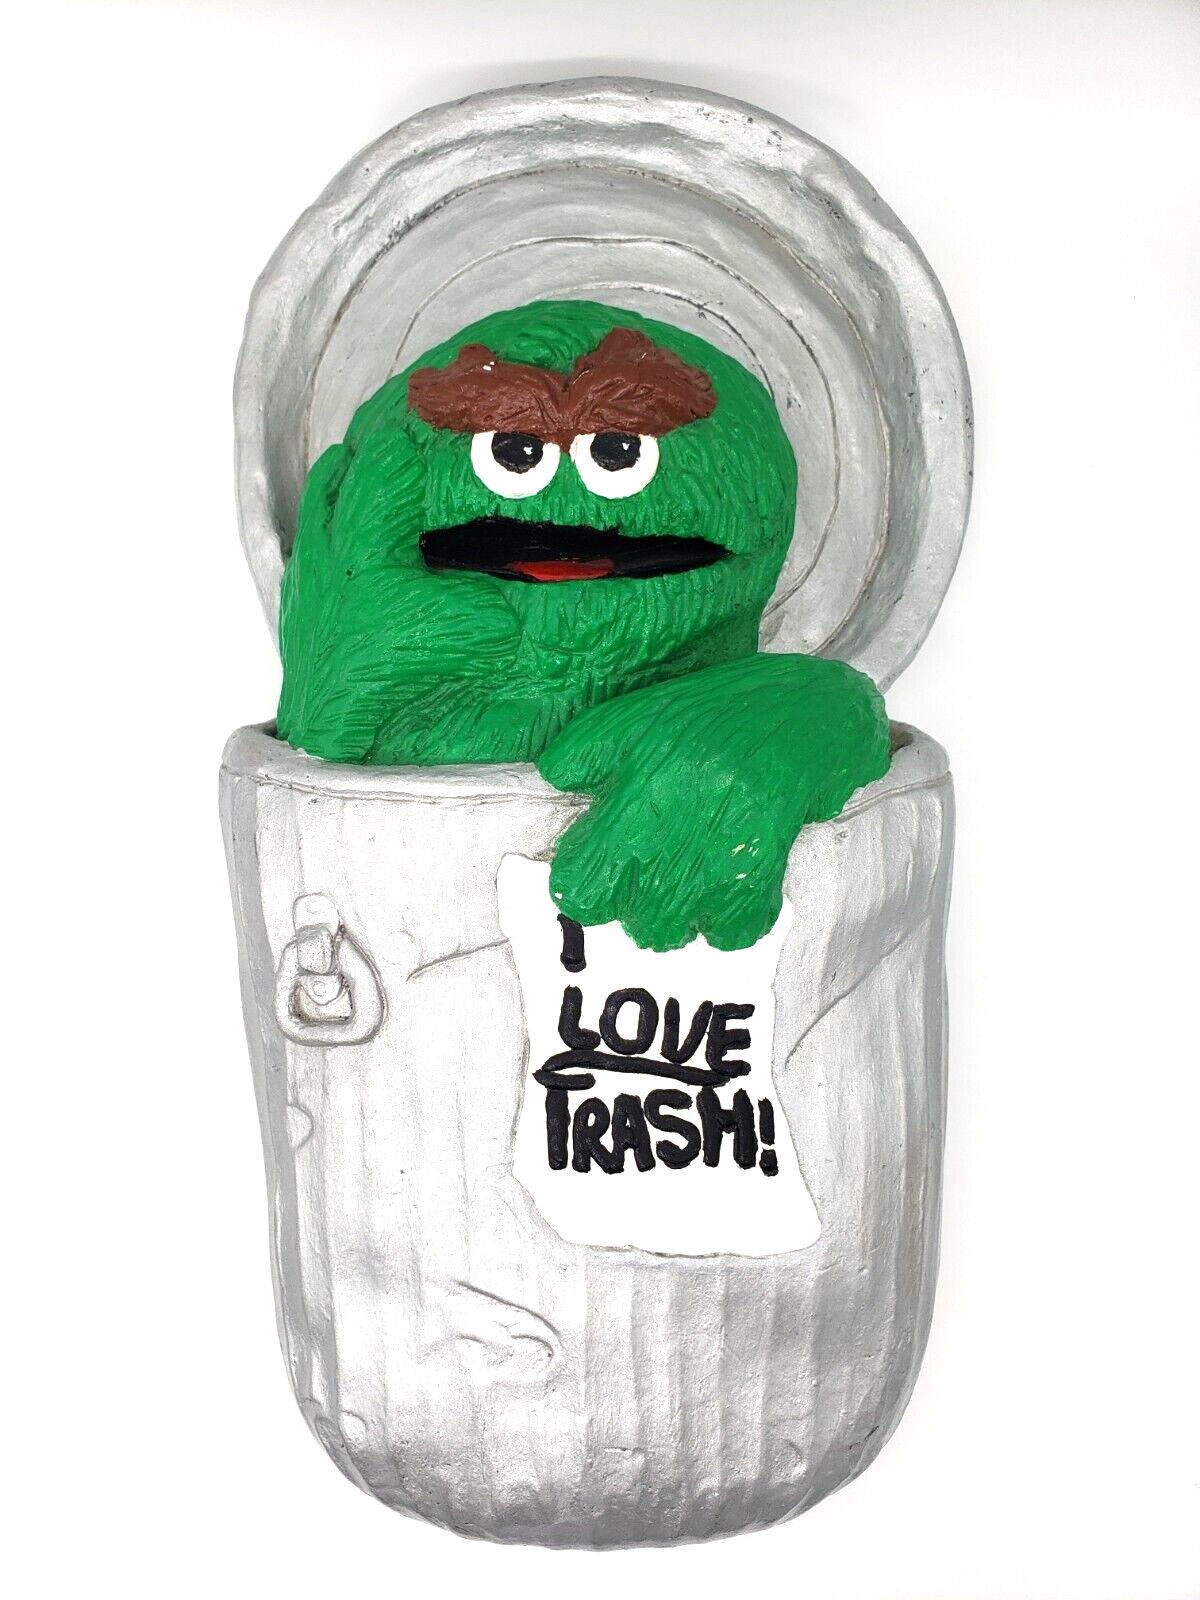 Vintage Oscar the Grouch Chalkware/Plaster Wall Hanging Sesame Street 1970’s